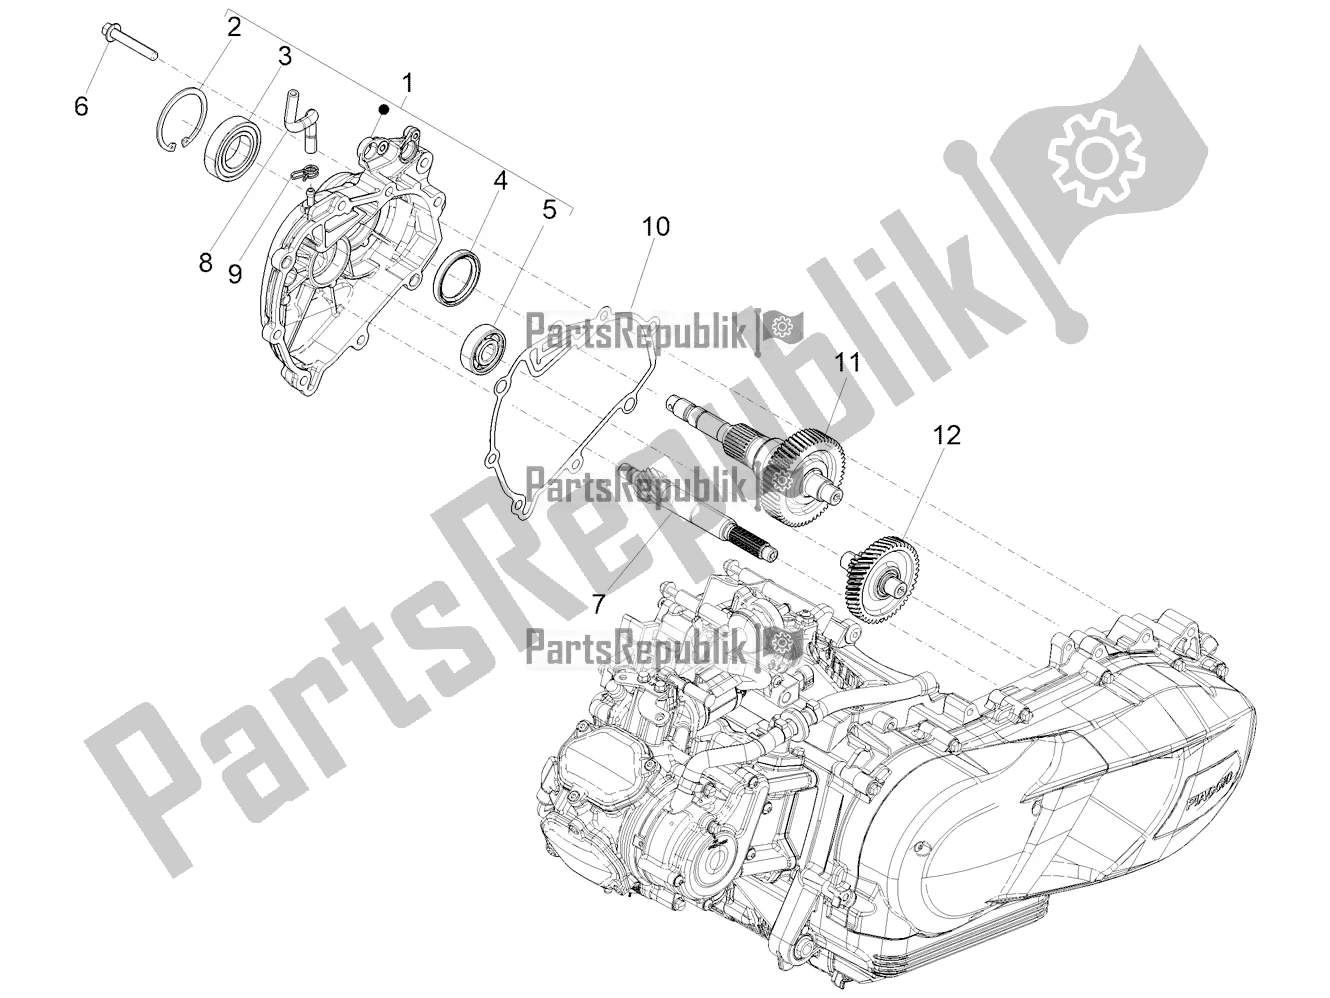 All parts for the Reduction Unit of the Aprilia SXR 160 Bsvi ABS Latam 2022